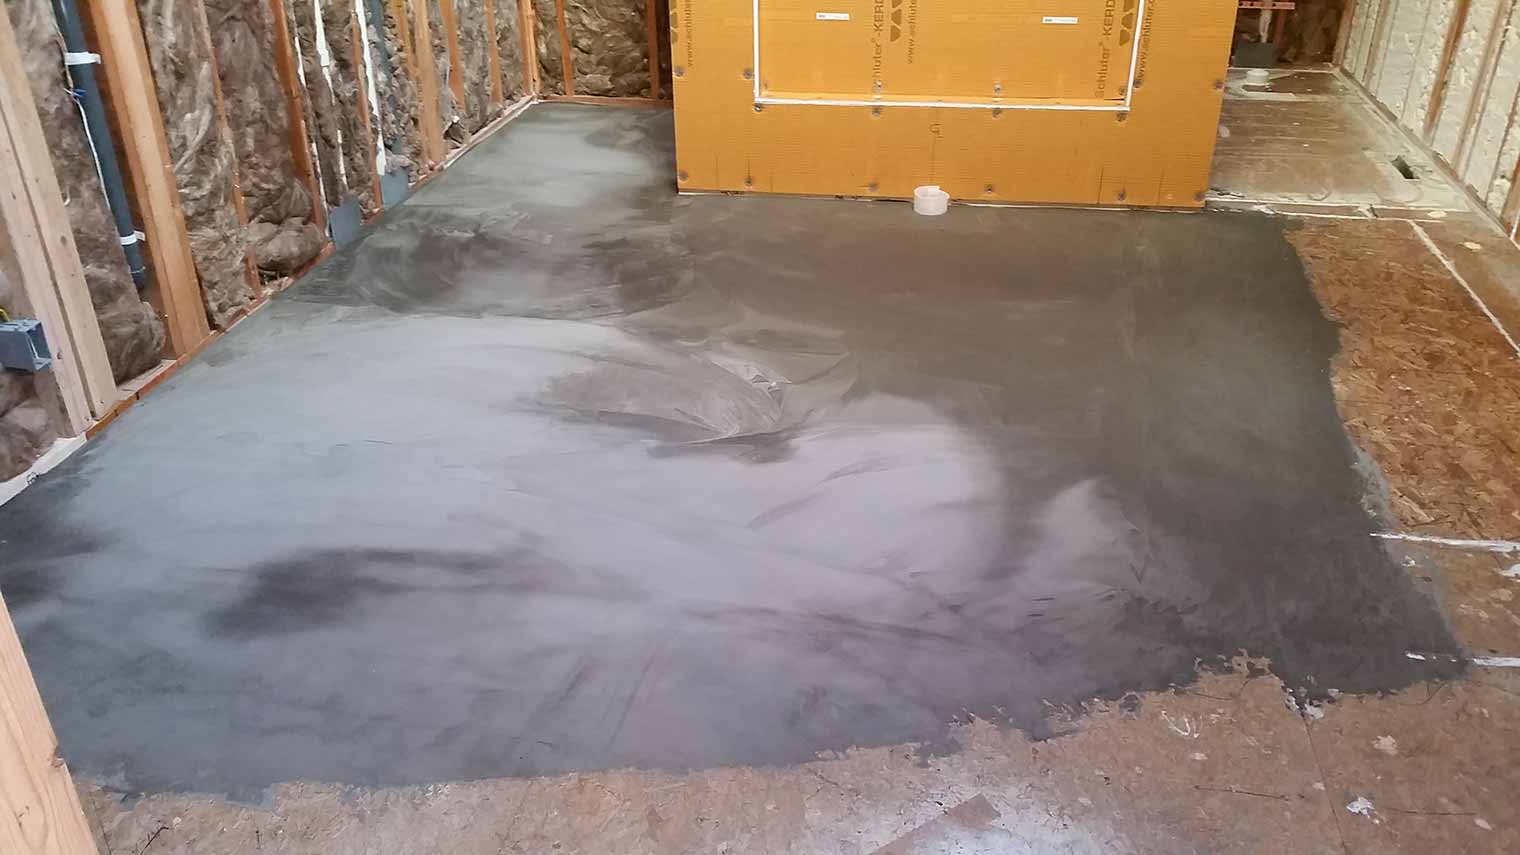 Floor leveler is poured onto the bathroom subfloor to even out the floor in this master bathroom remodel in Granger, Iowa by Silent Rivers